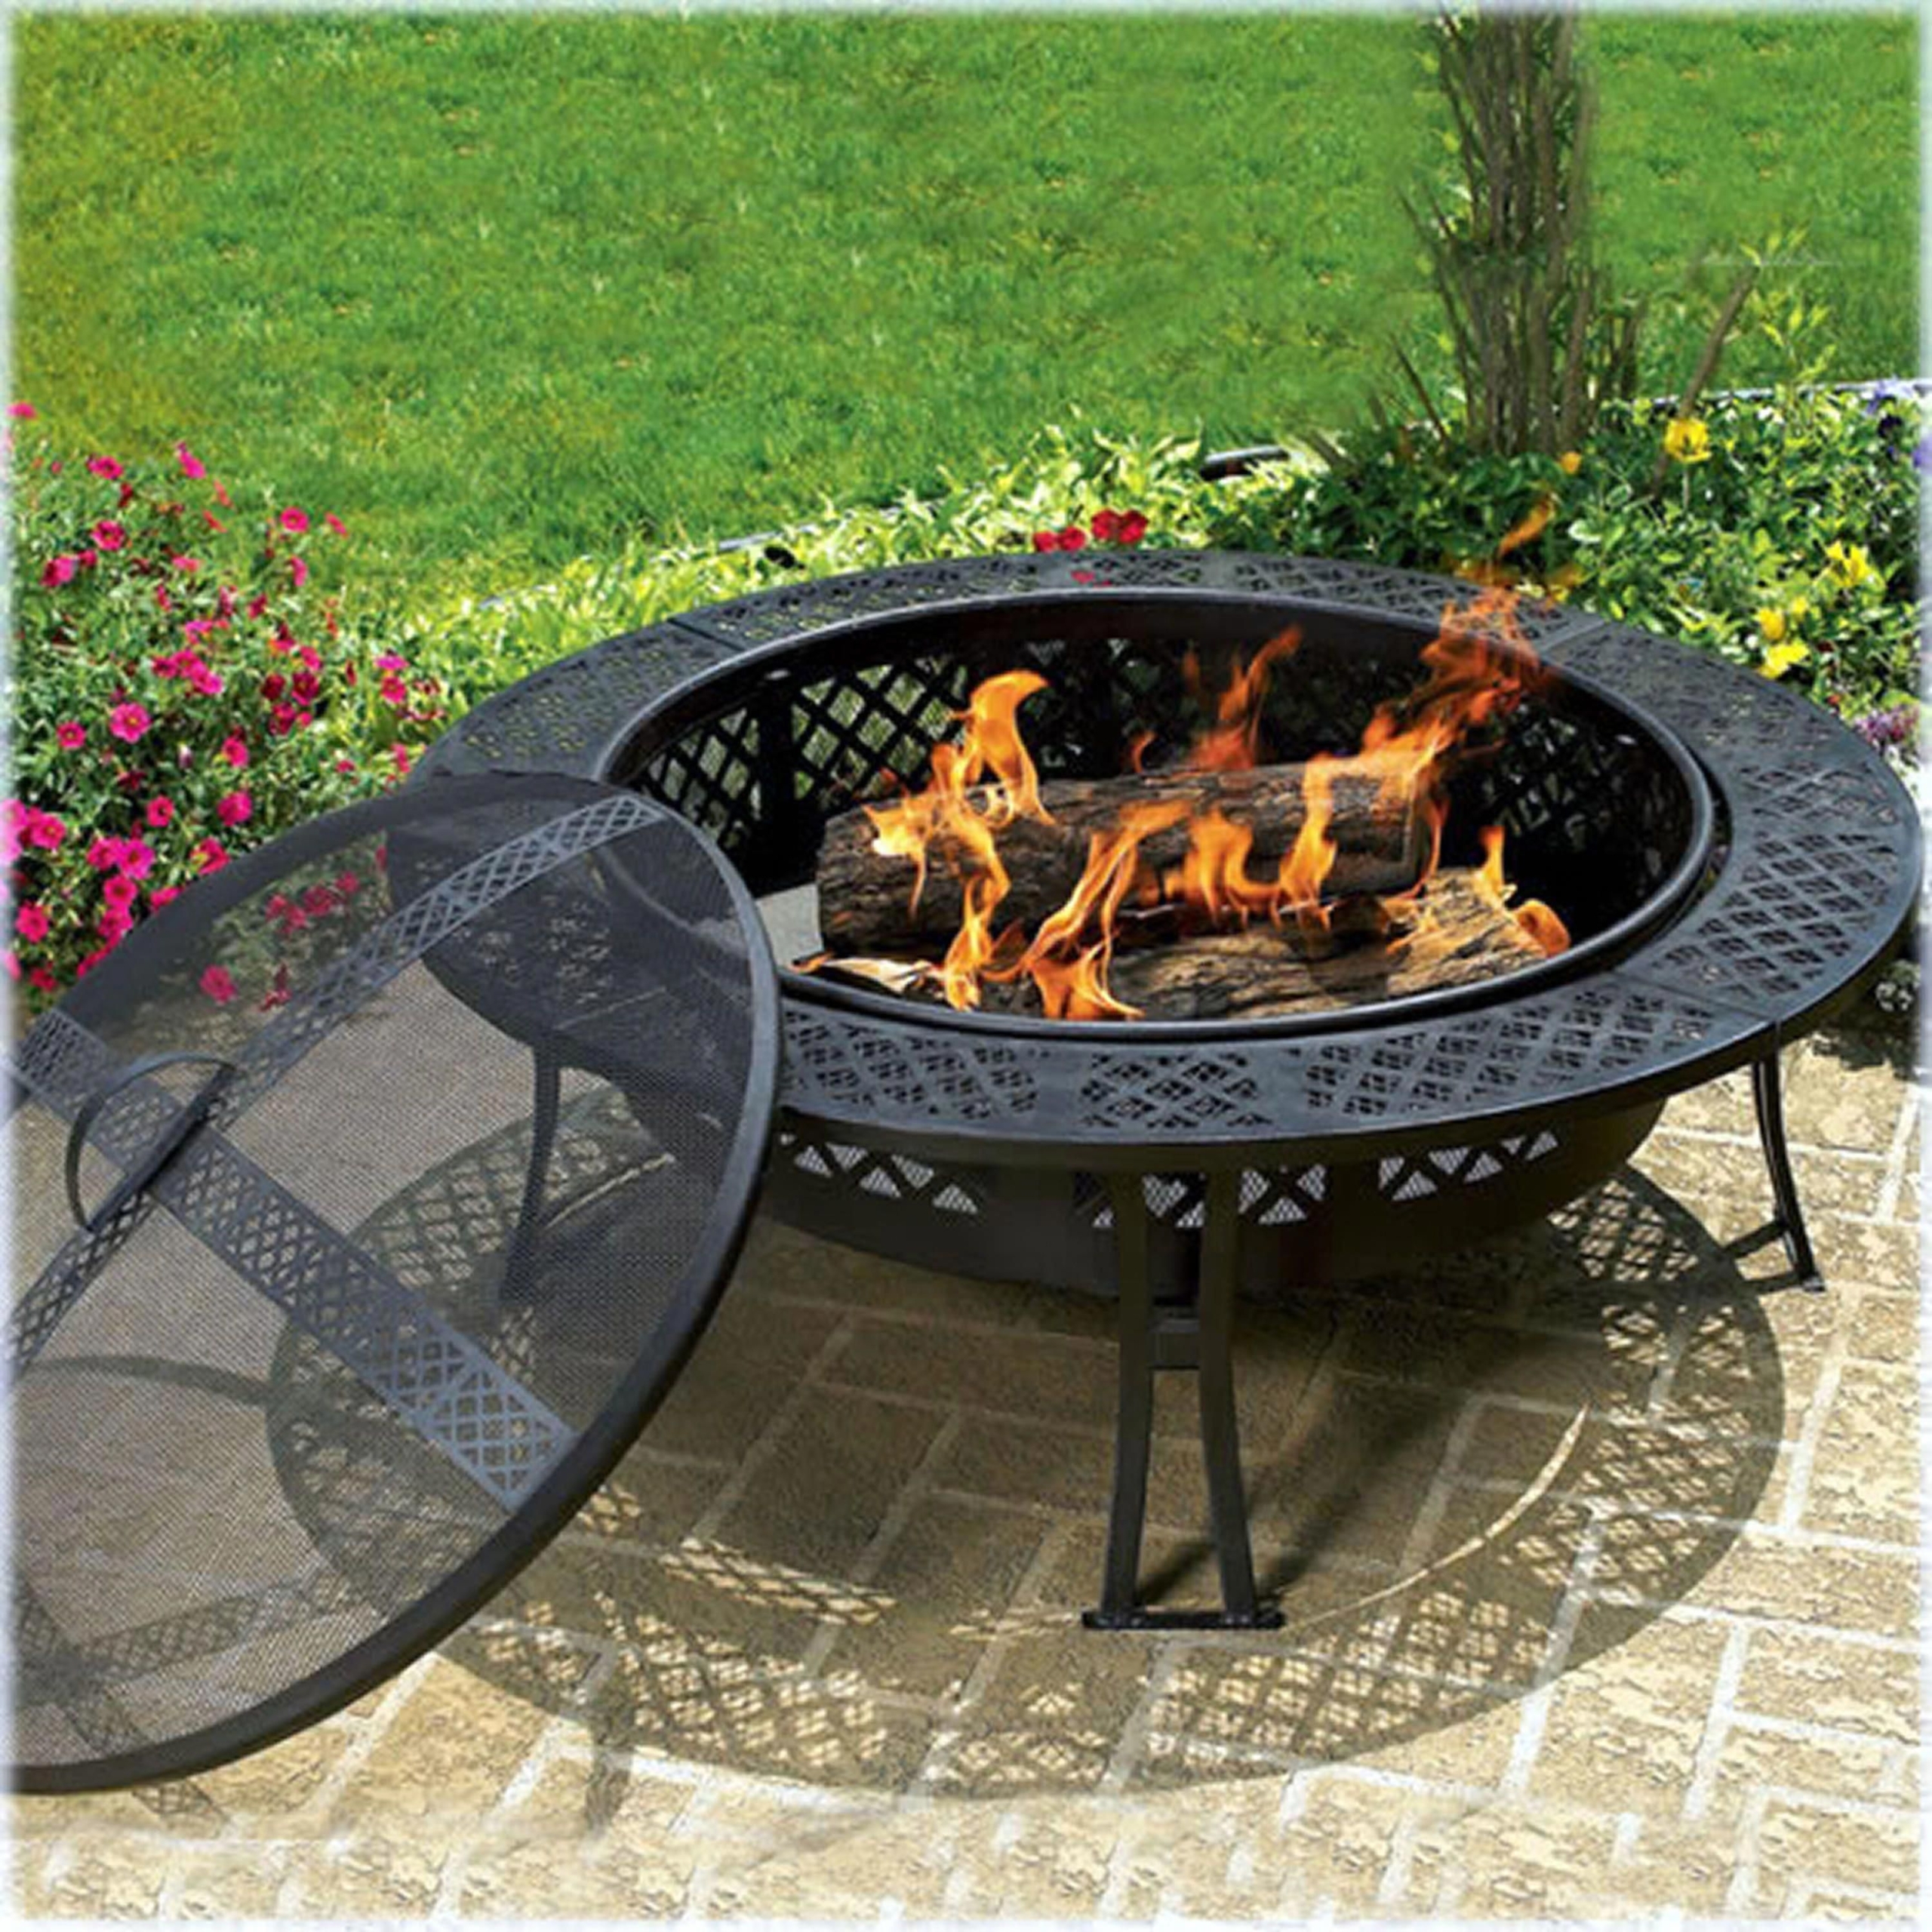 Wood Burning Fire Pit Table Visualhunt, Wood Burning Fire Pit Table Set